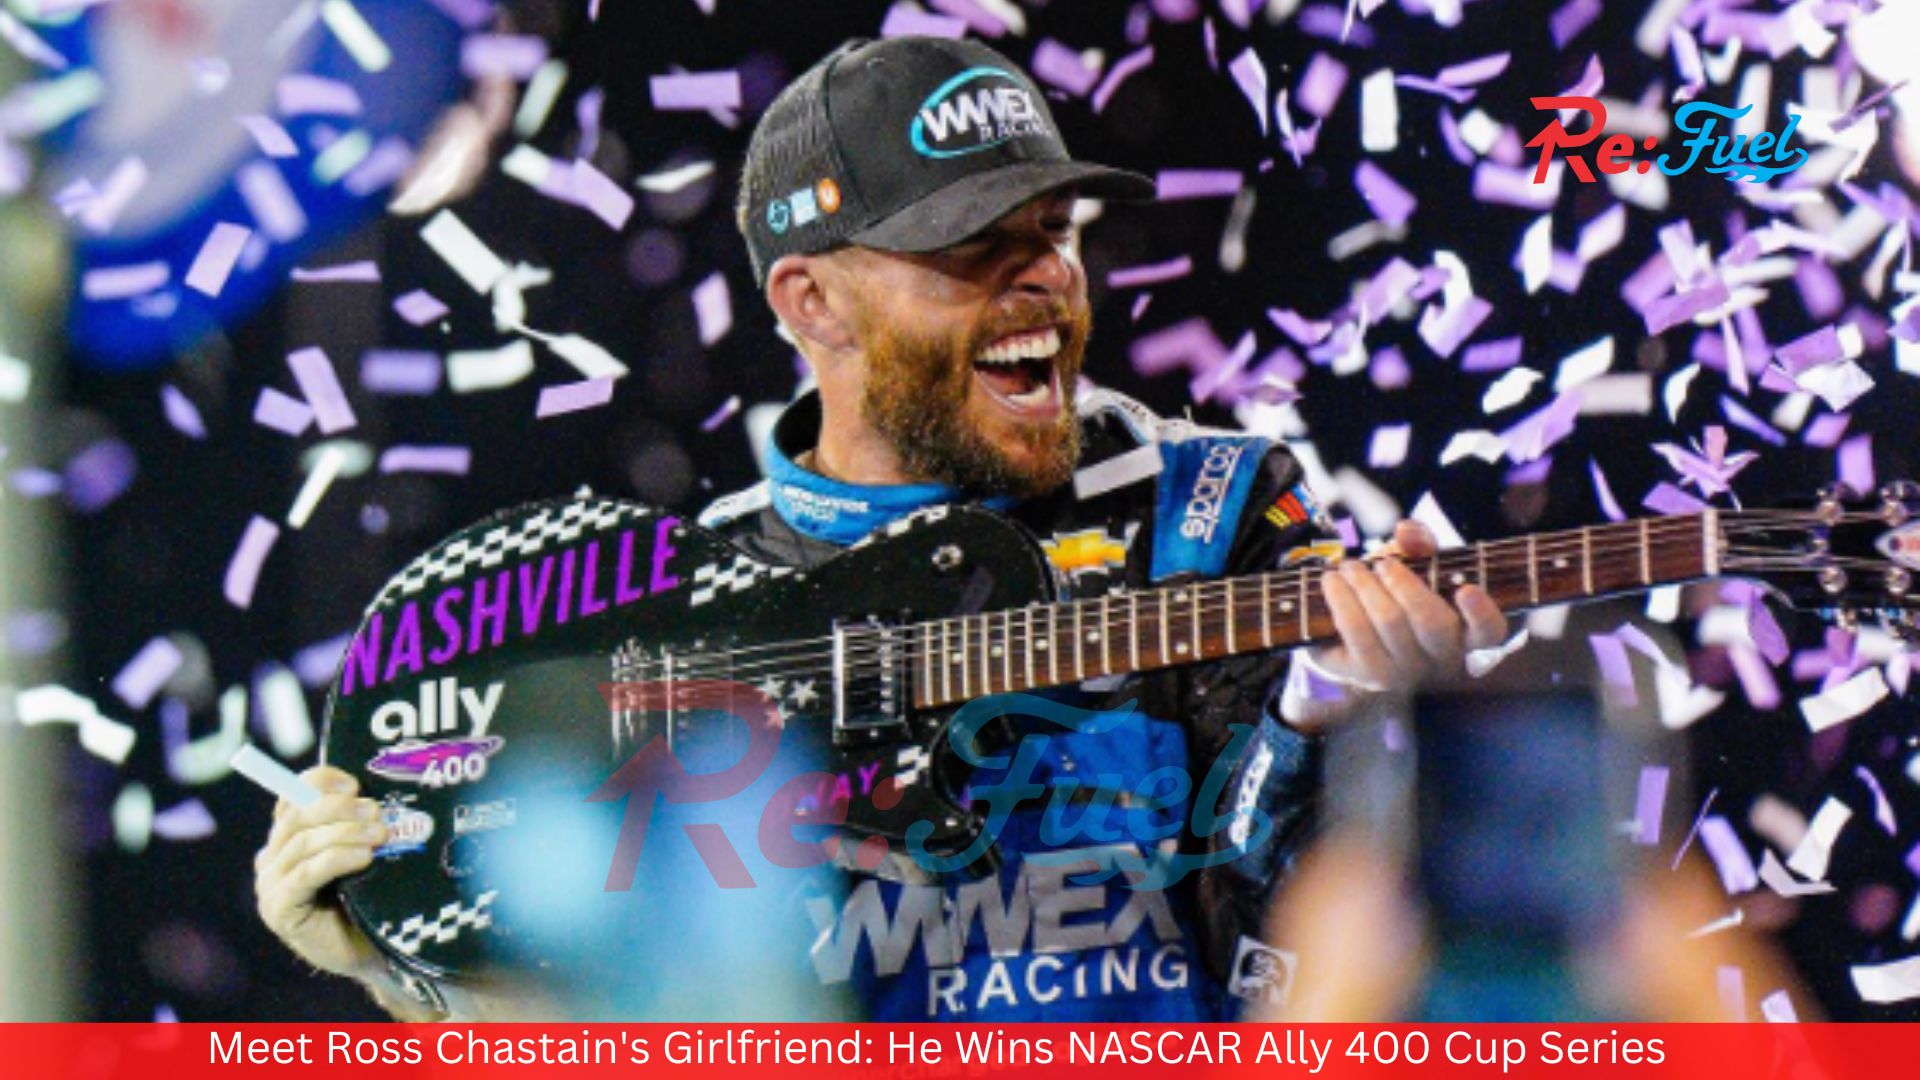 Meet Ross Chastain's Girlfriend: He Wins NASCAR Ally 400 Cup Series